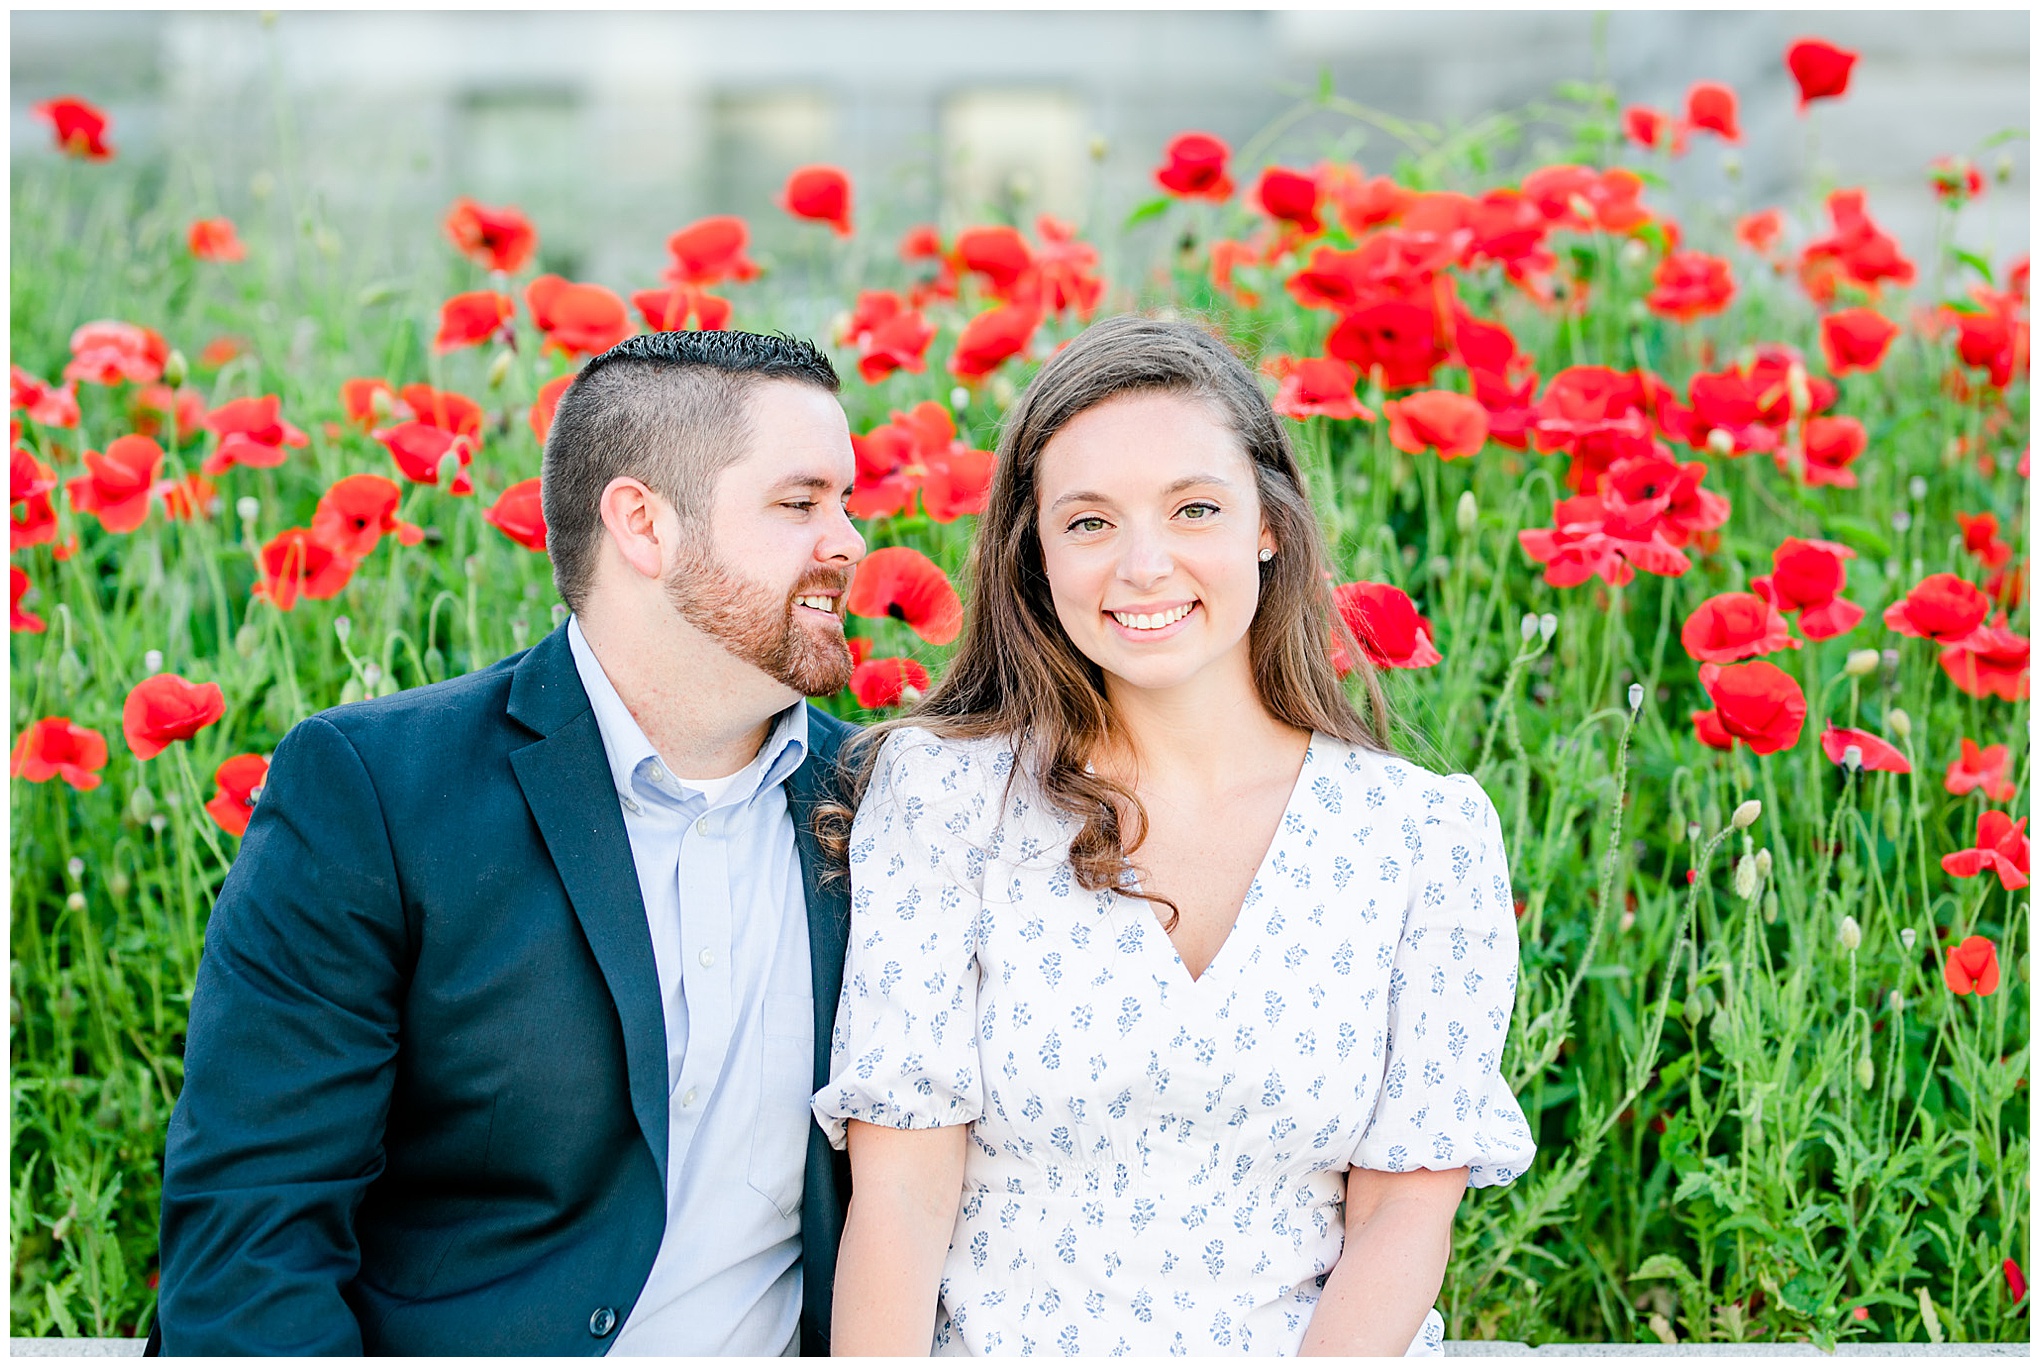 Capitol Hill engagement session, Capitol Hill portraits, D.C. engagement photography, D.C. engagement photographer, D.C. Capitol Hill D.C., DC photography, engagement photography, Rachel E.H. Photography, classic engagement photos, spring engagement photos